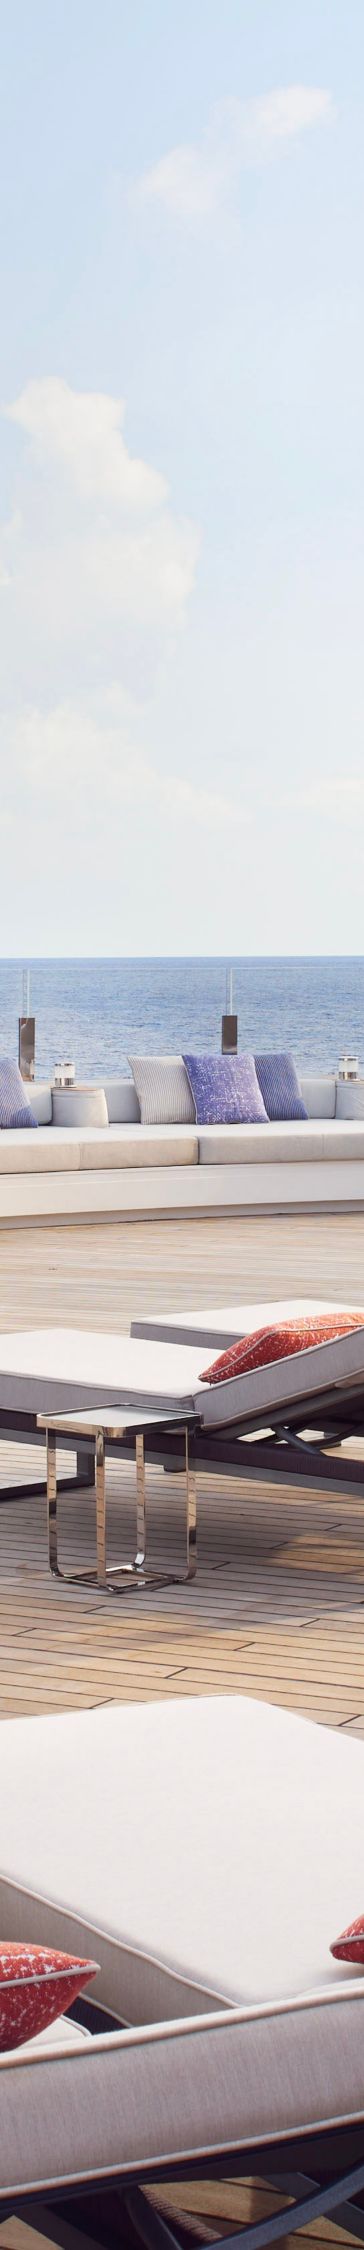 The Ritz-Carlton Yacht cruises to live entirely from 2020